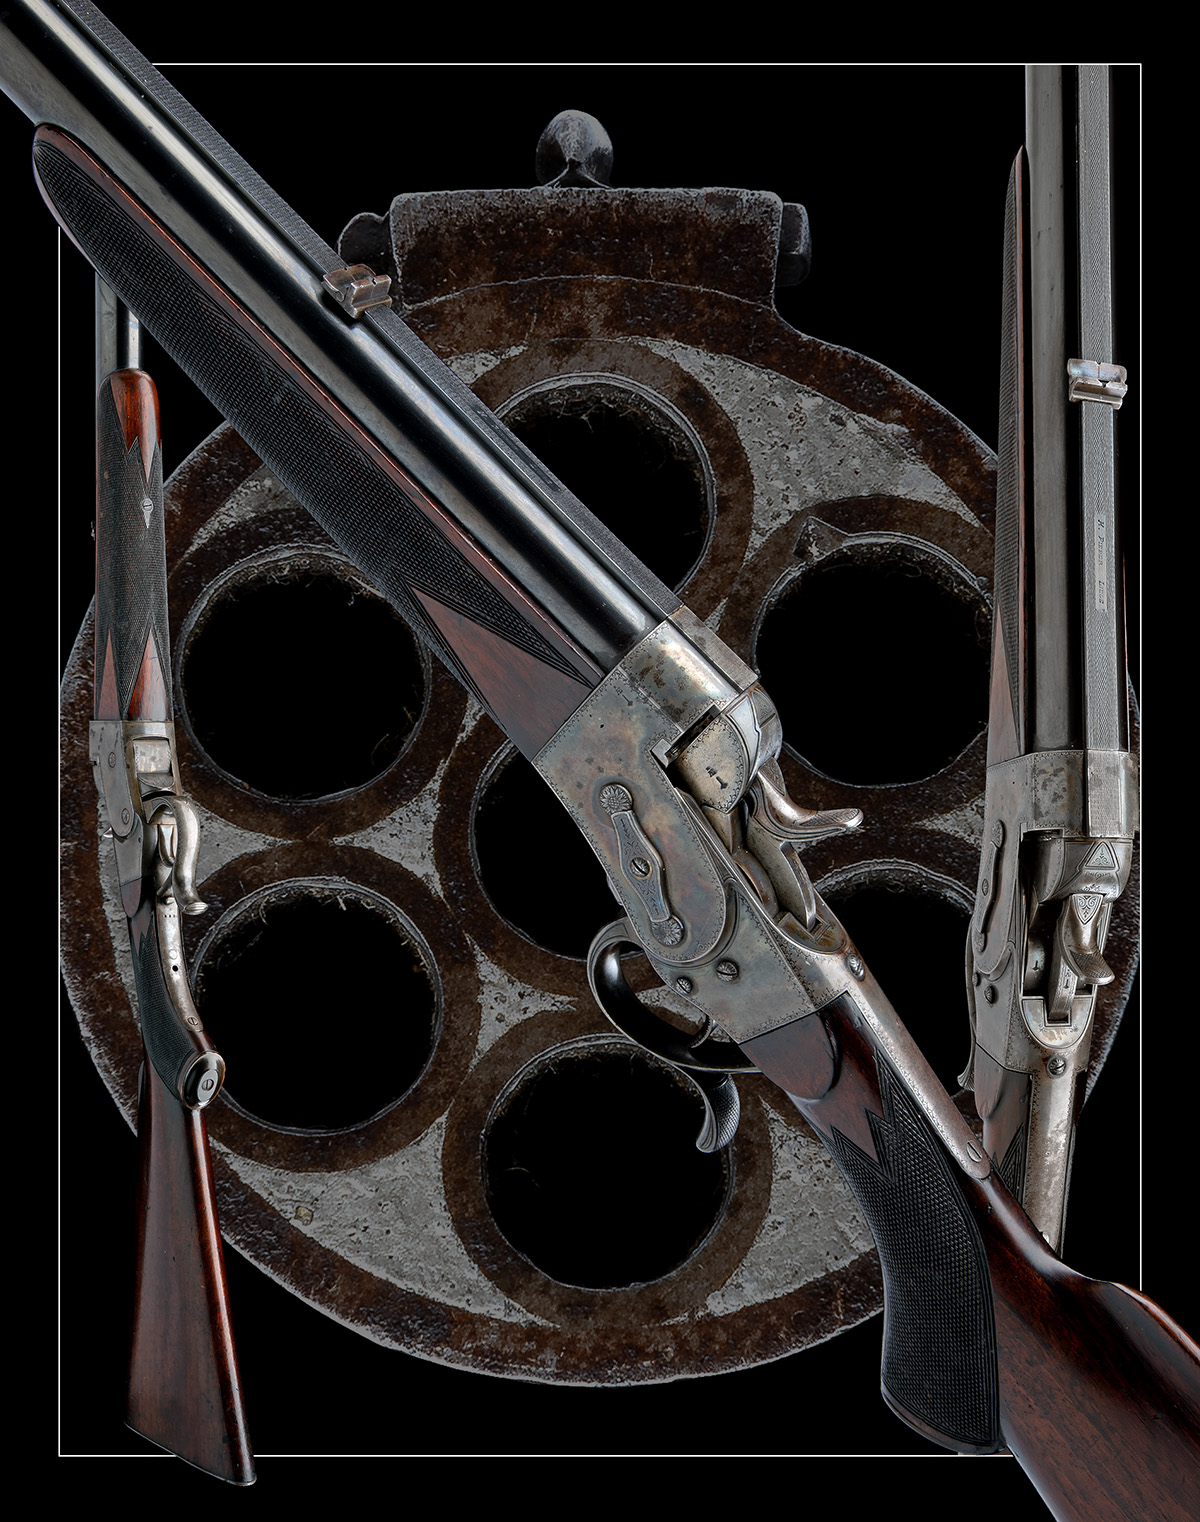 AN EXCEPTIONALLY RARE 7mm (RIMFIRE) SEVEN-SHOT ROLLING-BLOCK VOLLEY RIFLE SIGNED M. PIEPER, LIEGE, - Image 10 of 10